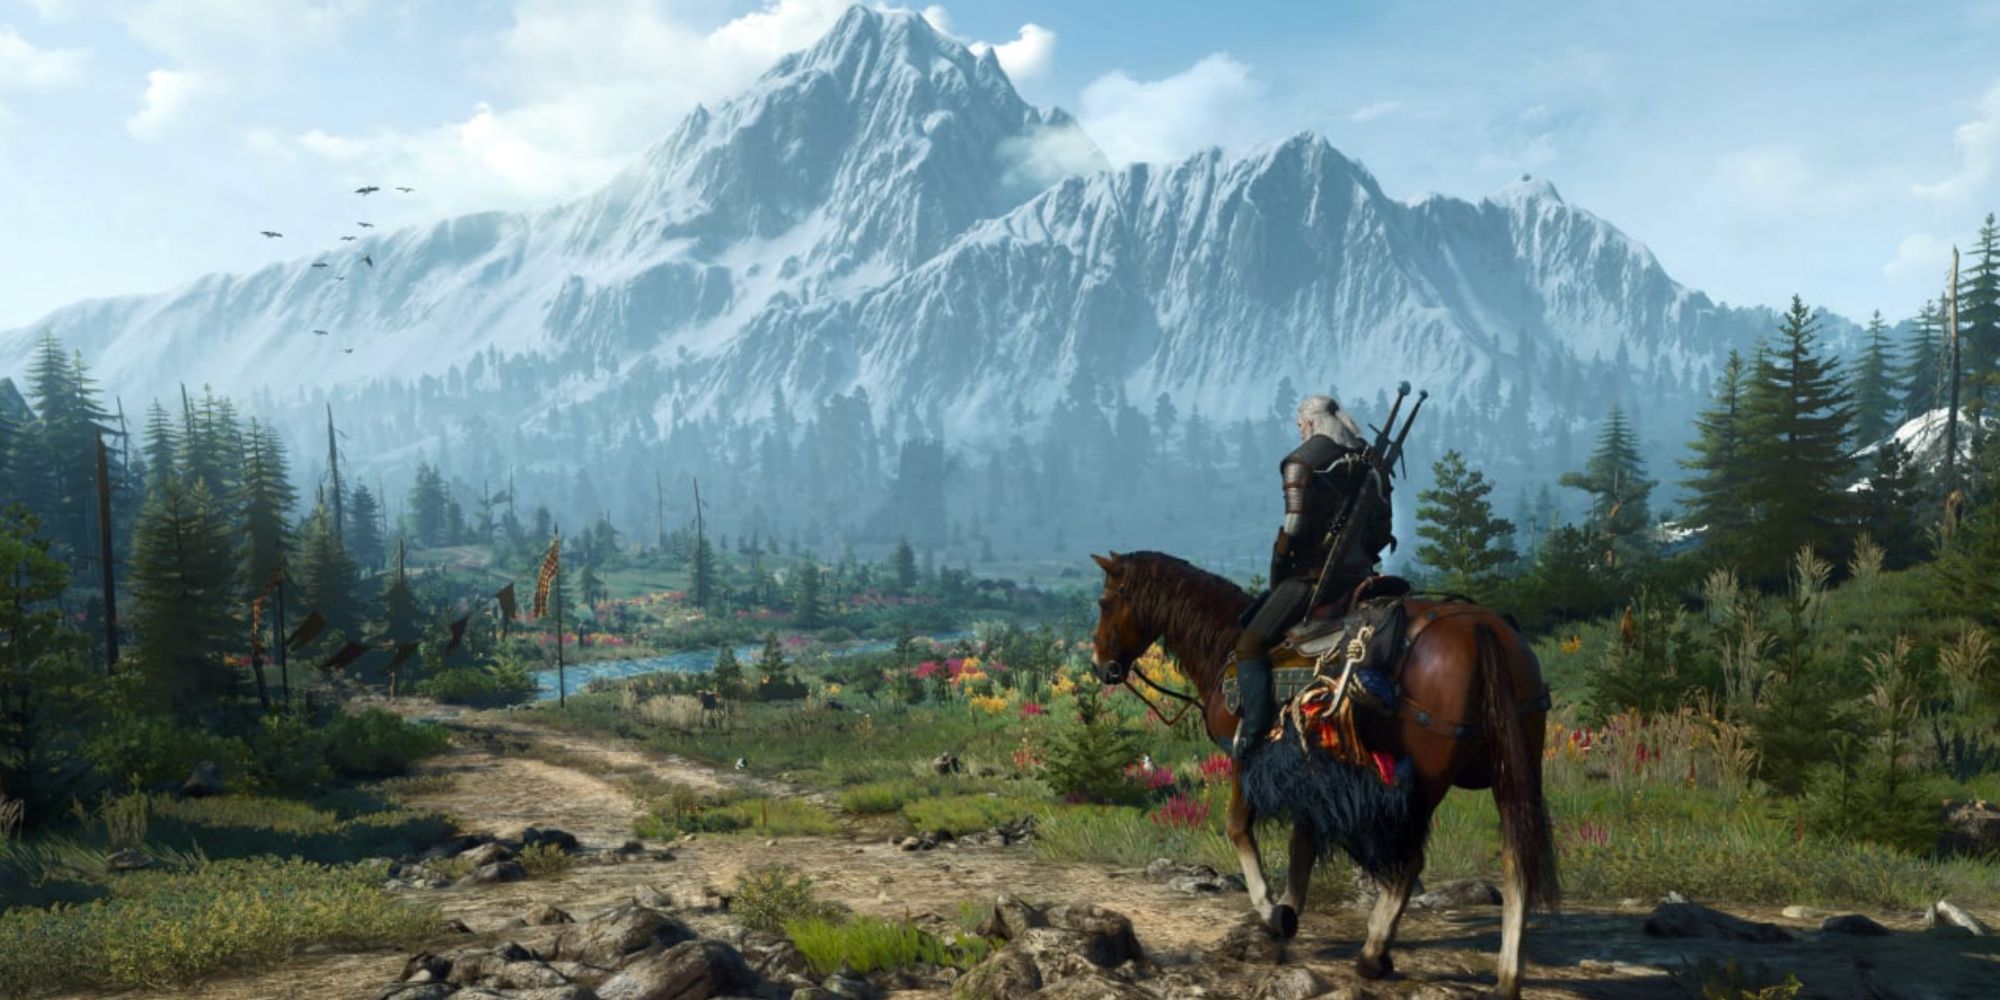 Geralt rode Roach and explored the open world in The Witcher 3 Wild Hunt